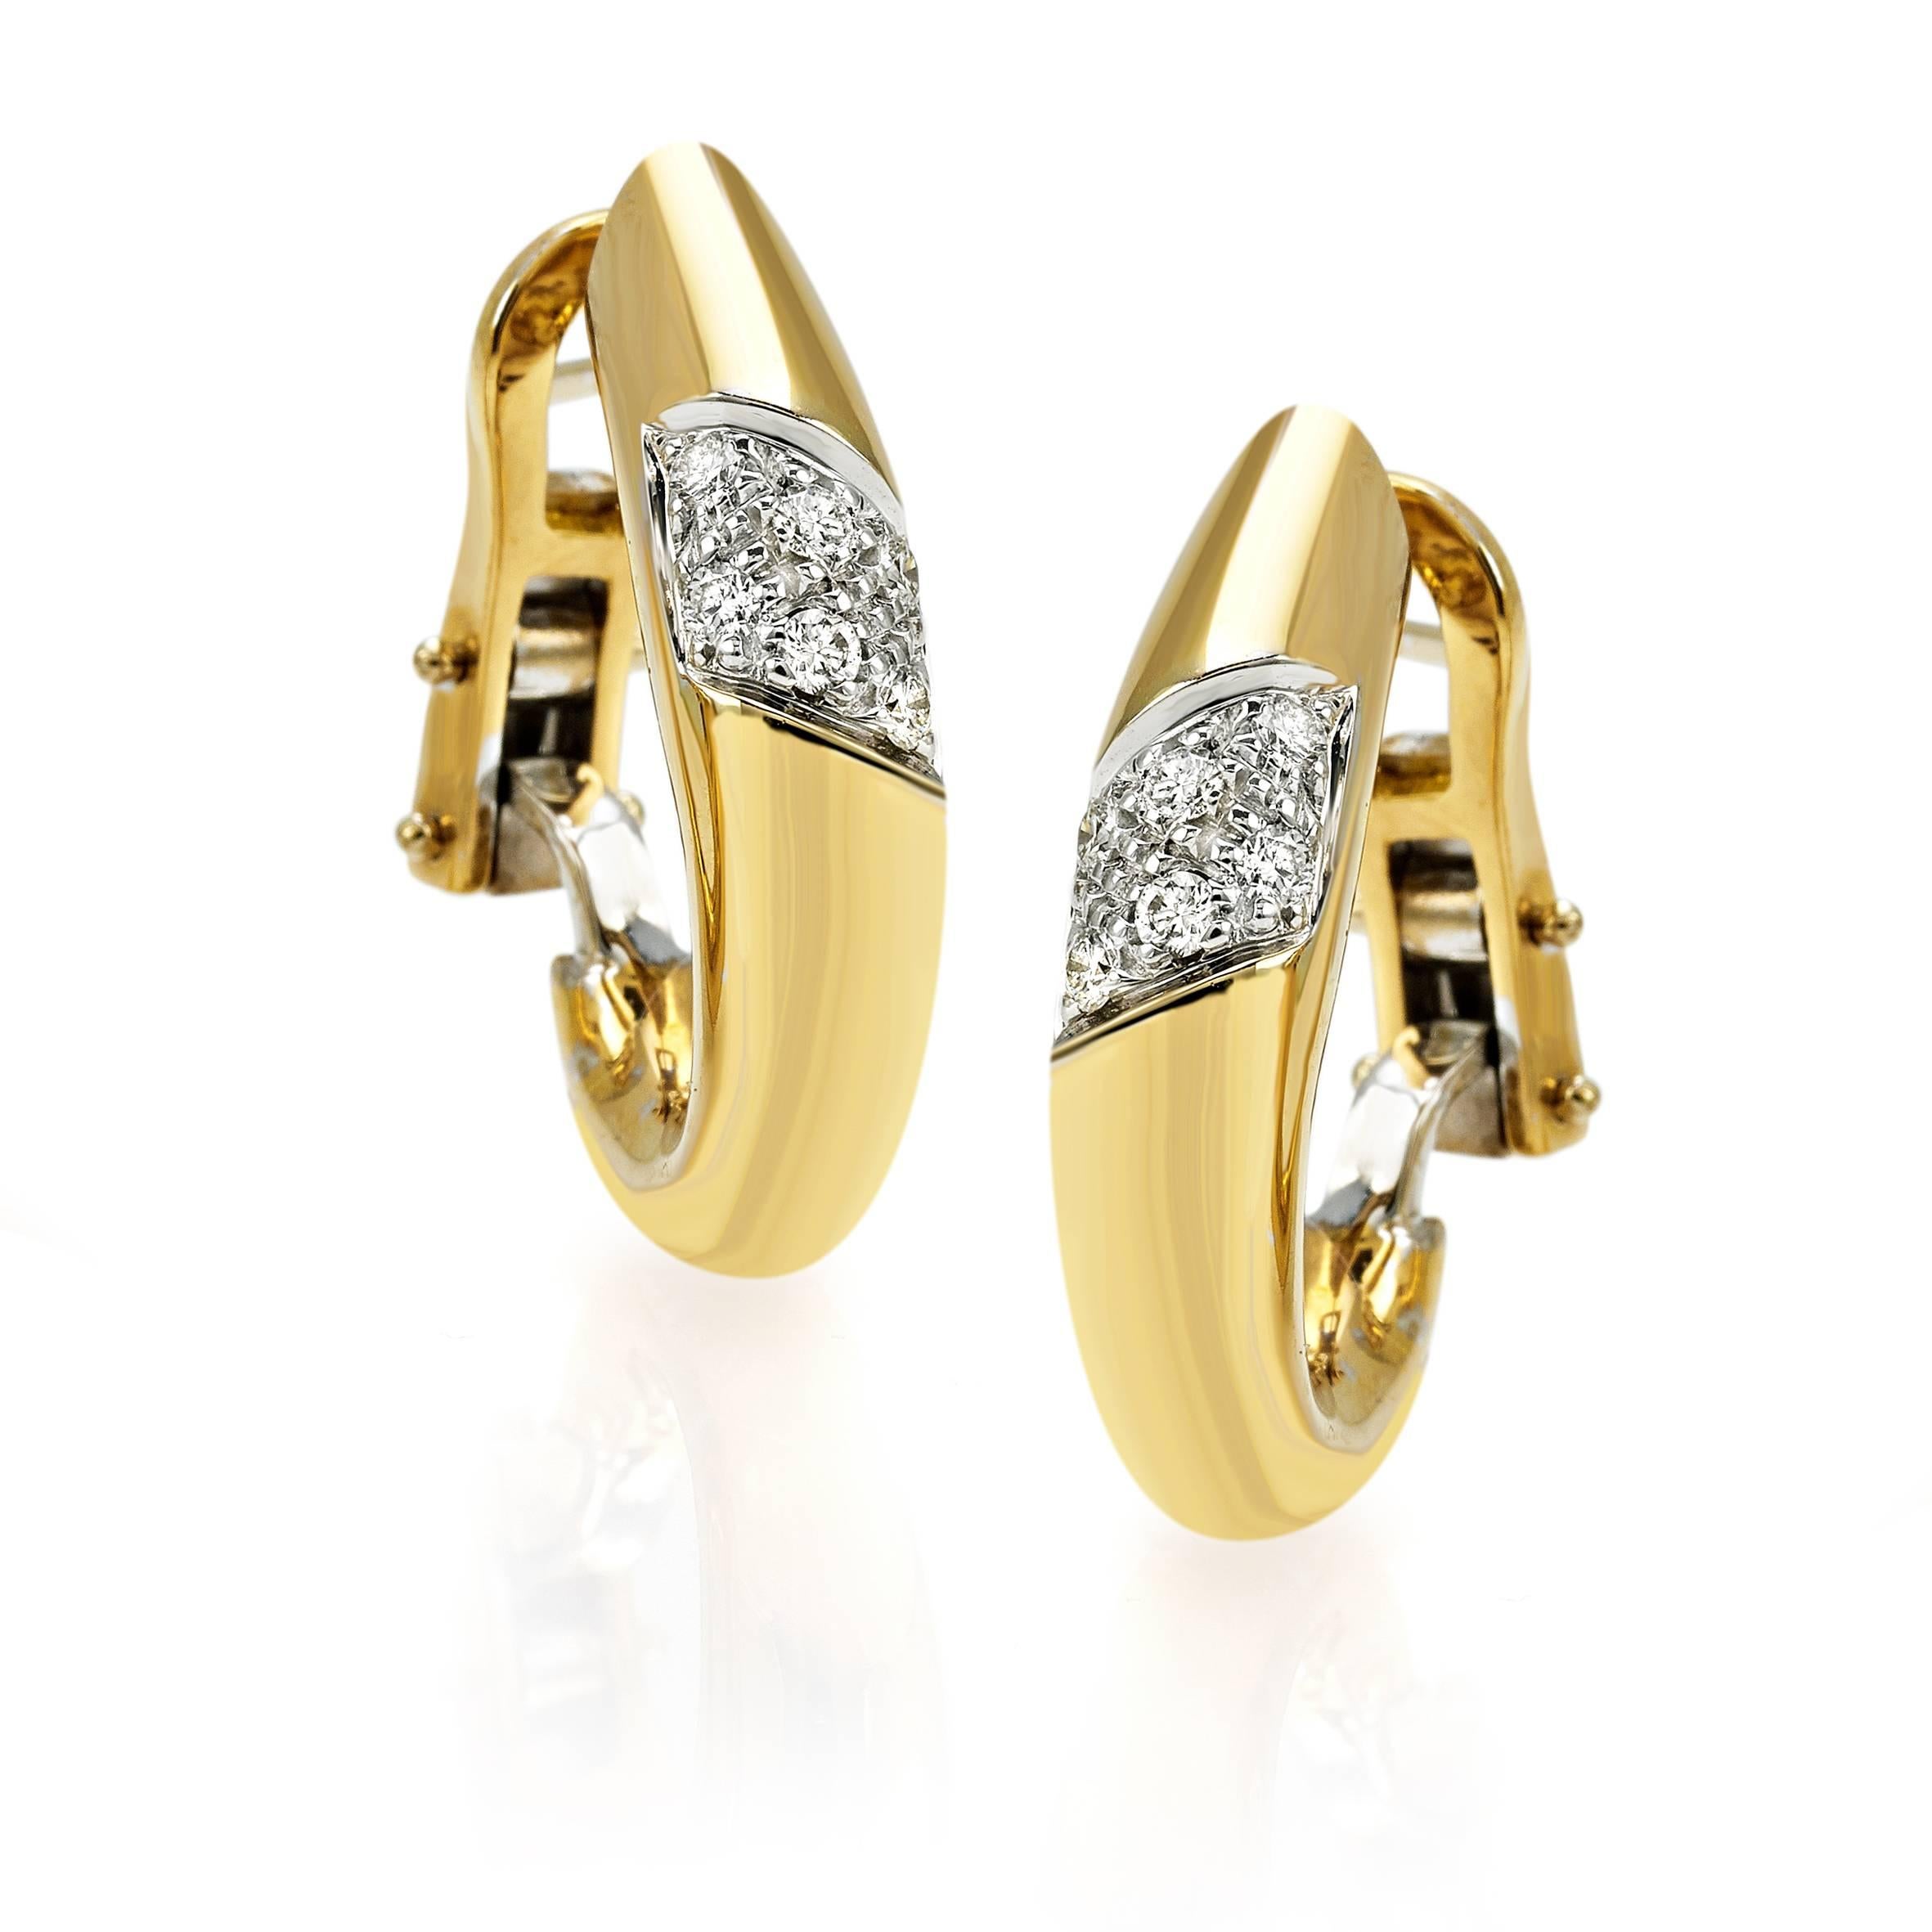 Essence earrings in 18 kt  yellow gold and white diamonds 
This classic collection in Micheletto tradition

the total weight of the gold is  gr 14.10
the total weight of the white diamonds is ct 0.26 - color GH clarity VVS1

STAMP: 10 MI ITALY